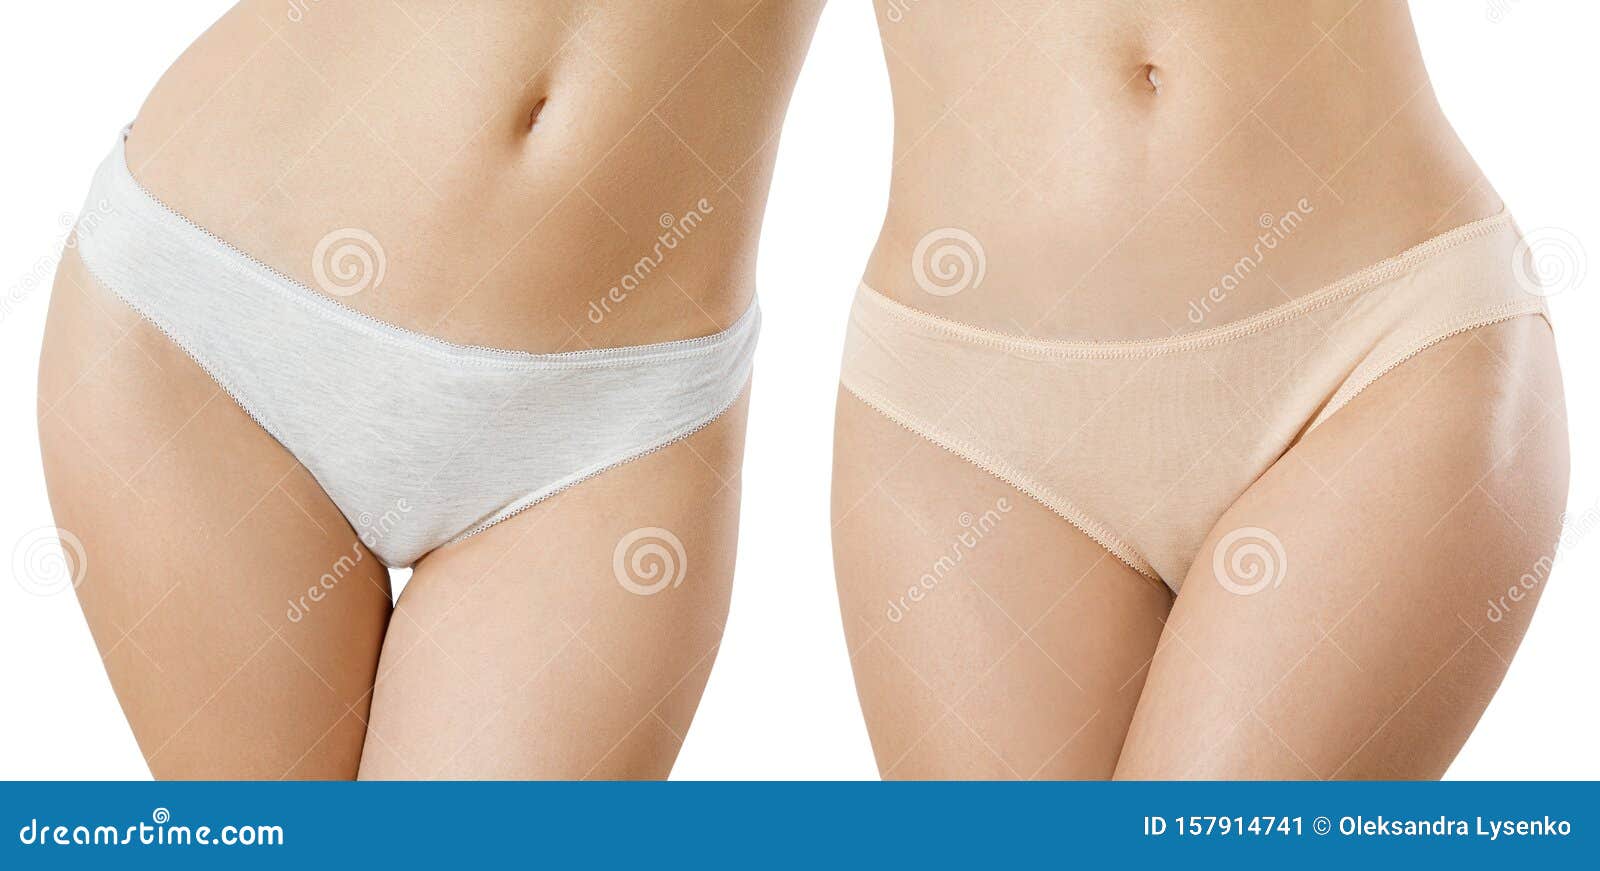 https://thumbs.dreamstime.com/z/types-panties-front-view-close-up-women-set-different-beige-gray-underwear-blank-template-mock-up-background-types-157914741.jpg